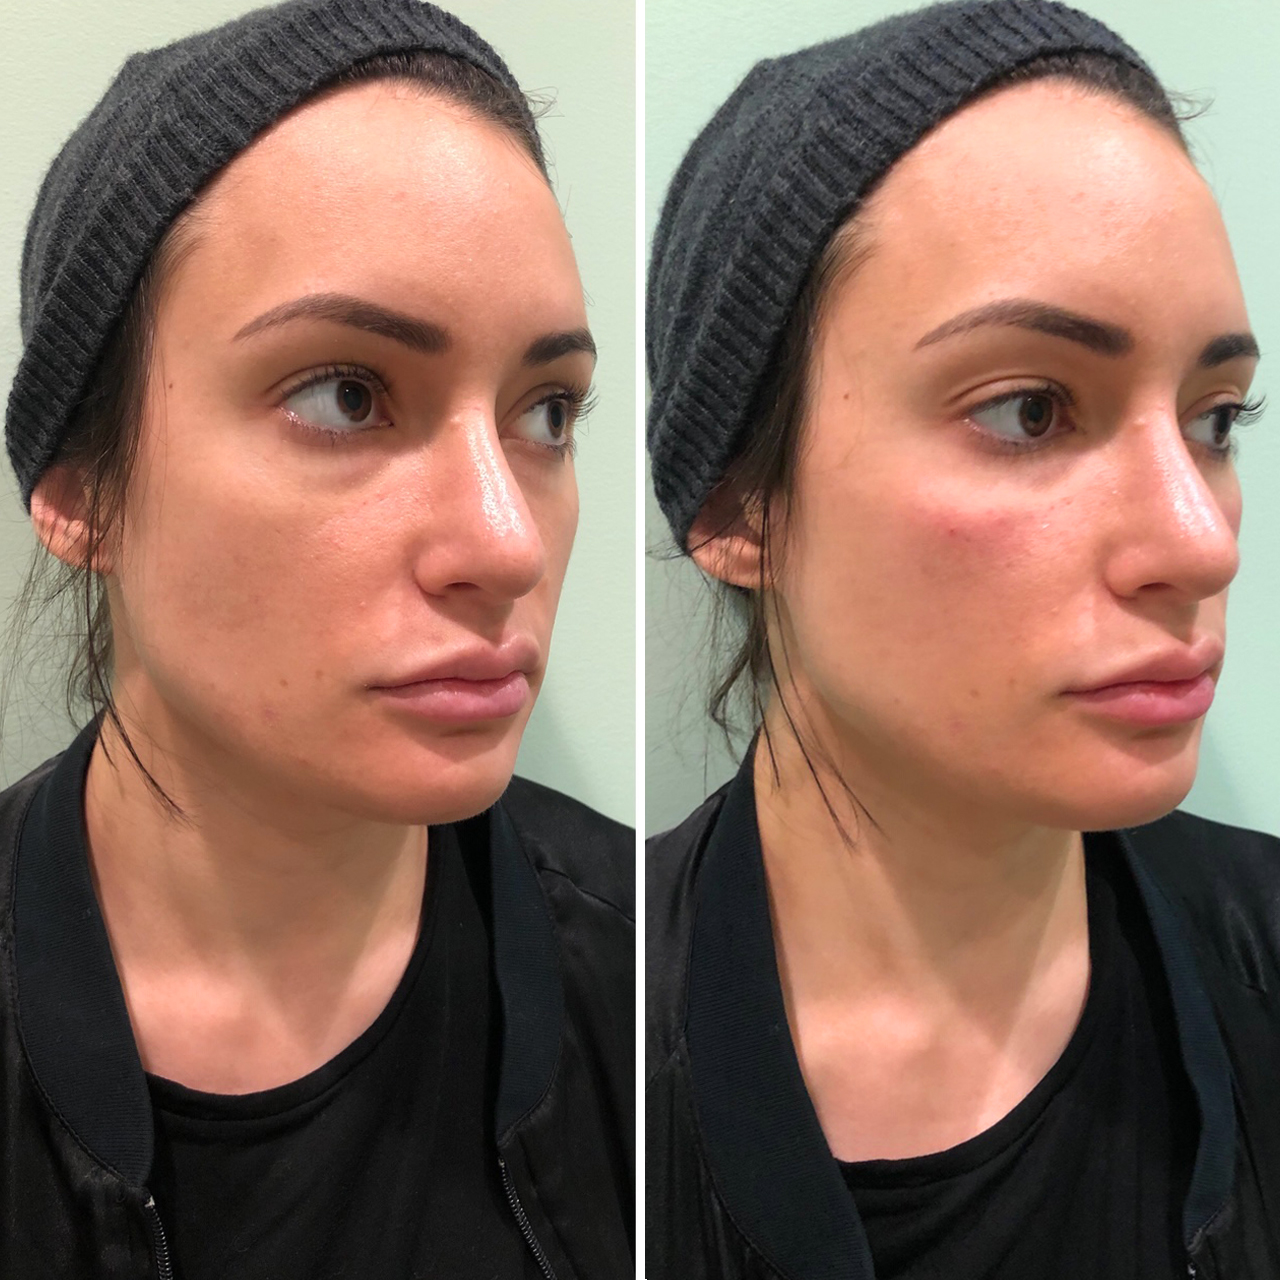 Photo of before and after results of facial fillers for women.